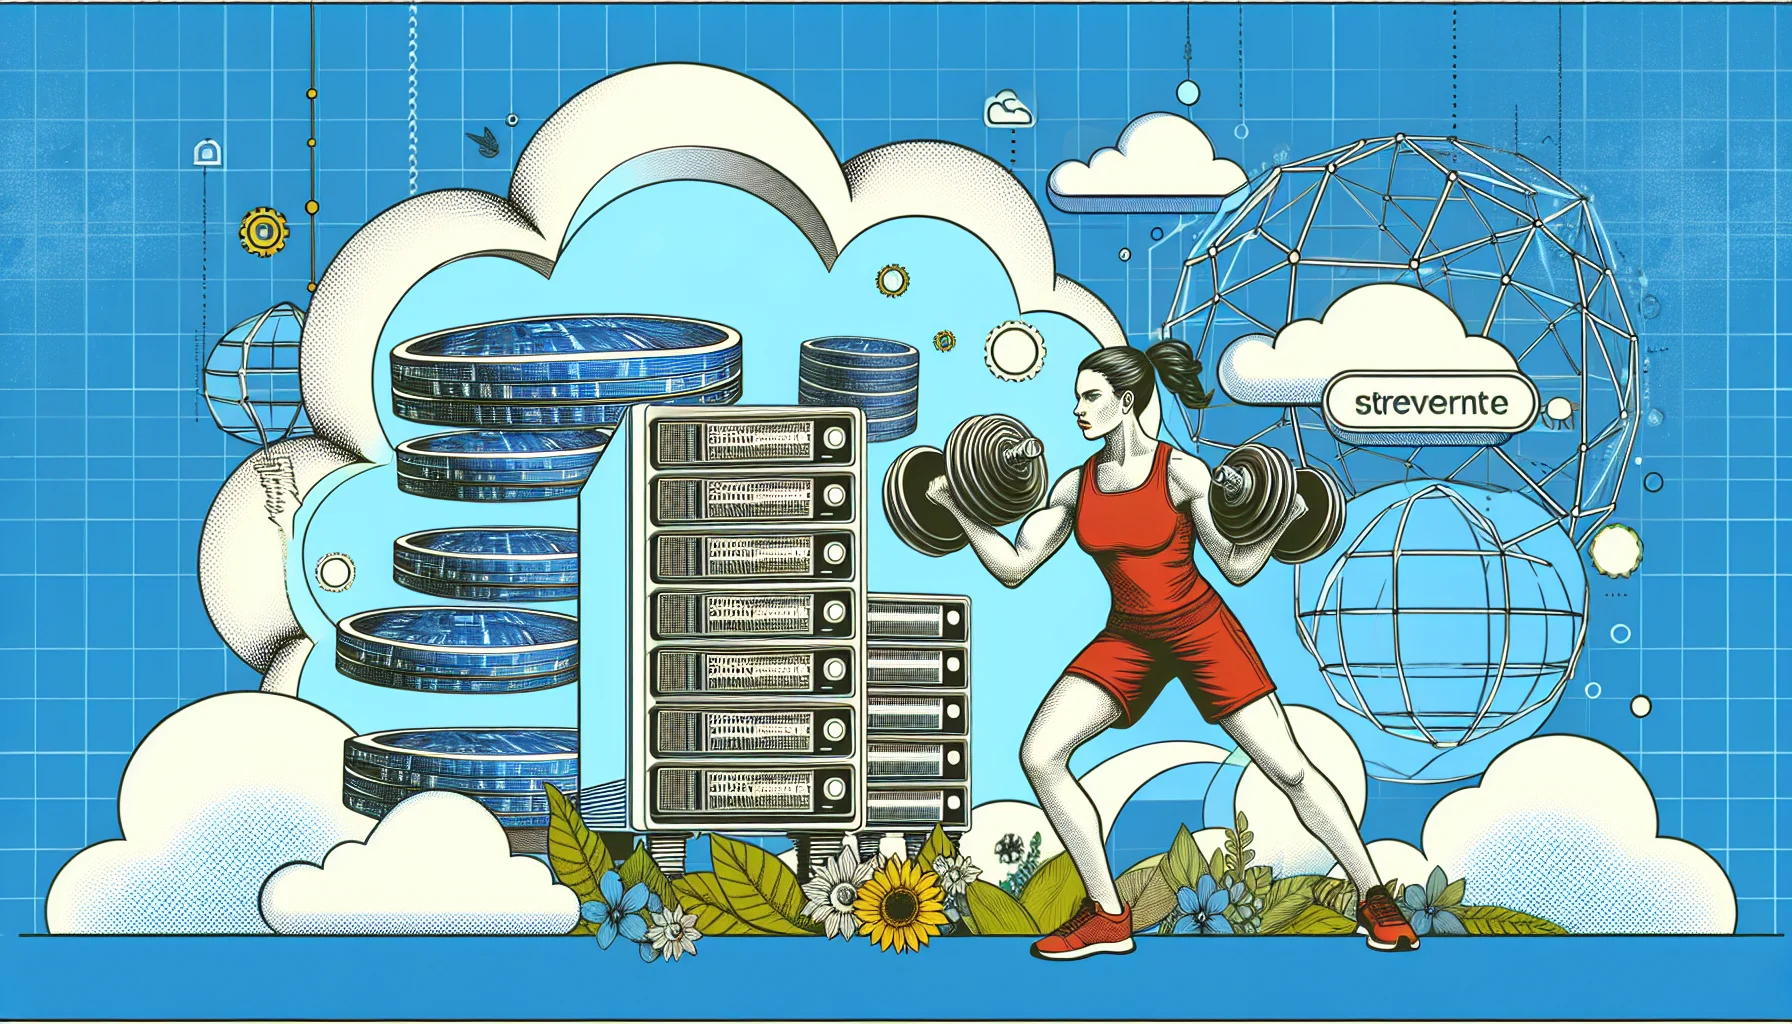 Create a detailed image showcasing a personal trainer-themed woman with a fitness physique impressively lifting incredibly large internet-related icons like a cloud server and website domain in a comic-like scenario with a witty caption, 'Flexing the Power of Web Hosting', portraying the fun and interesting aspects of web hosting services.